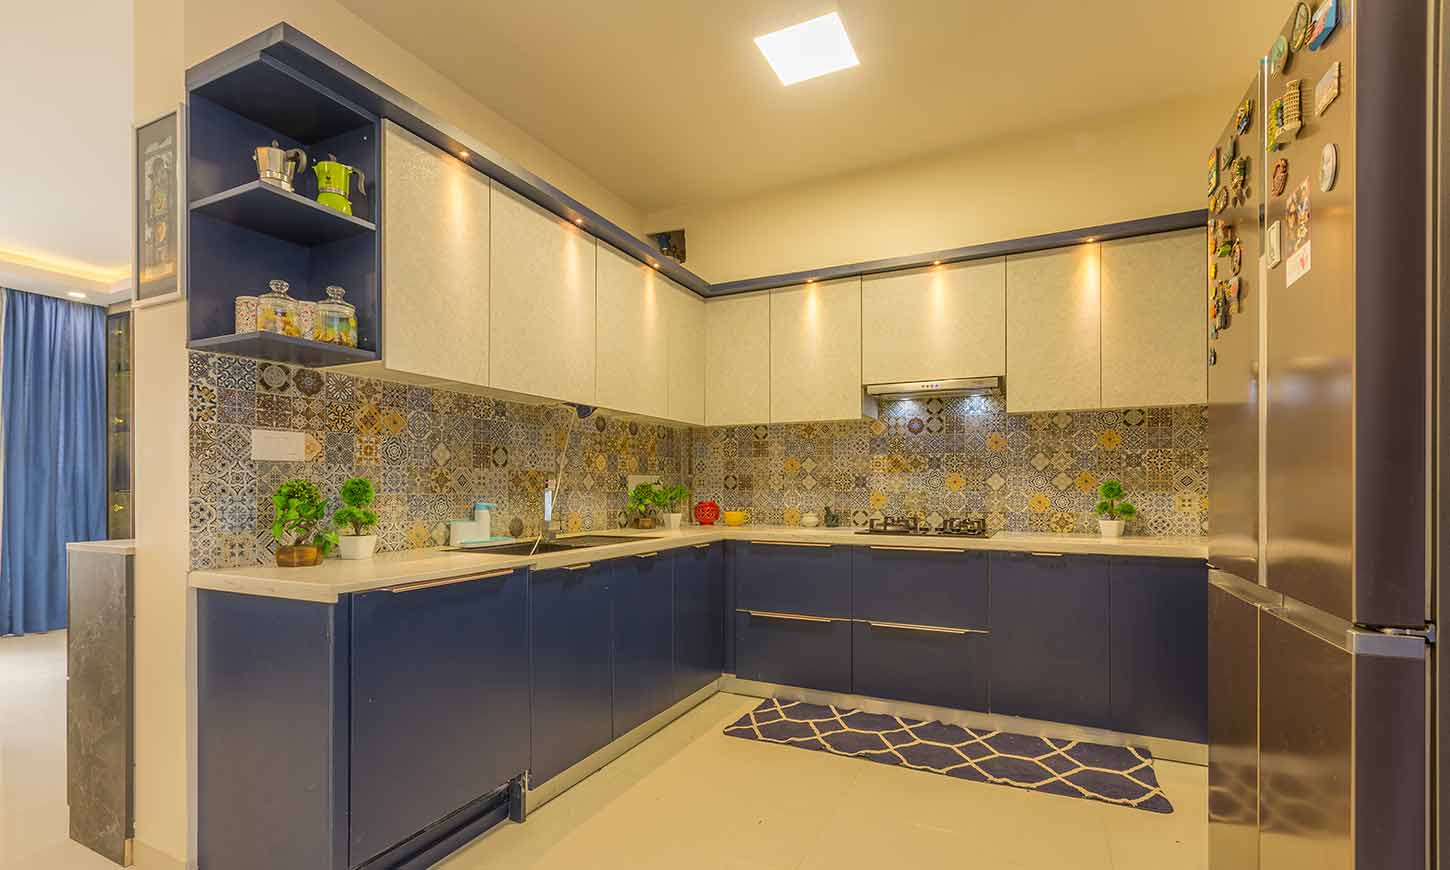 Modular kitchen price in bangalore with a blue and white kitchen designed by design cafe mg road